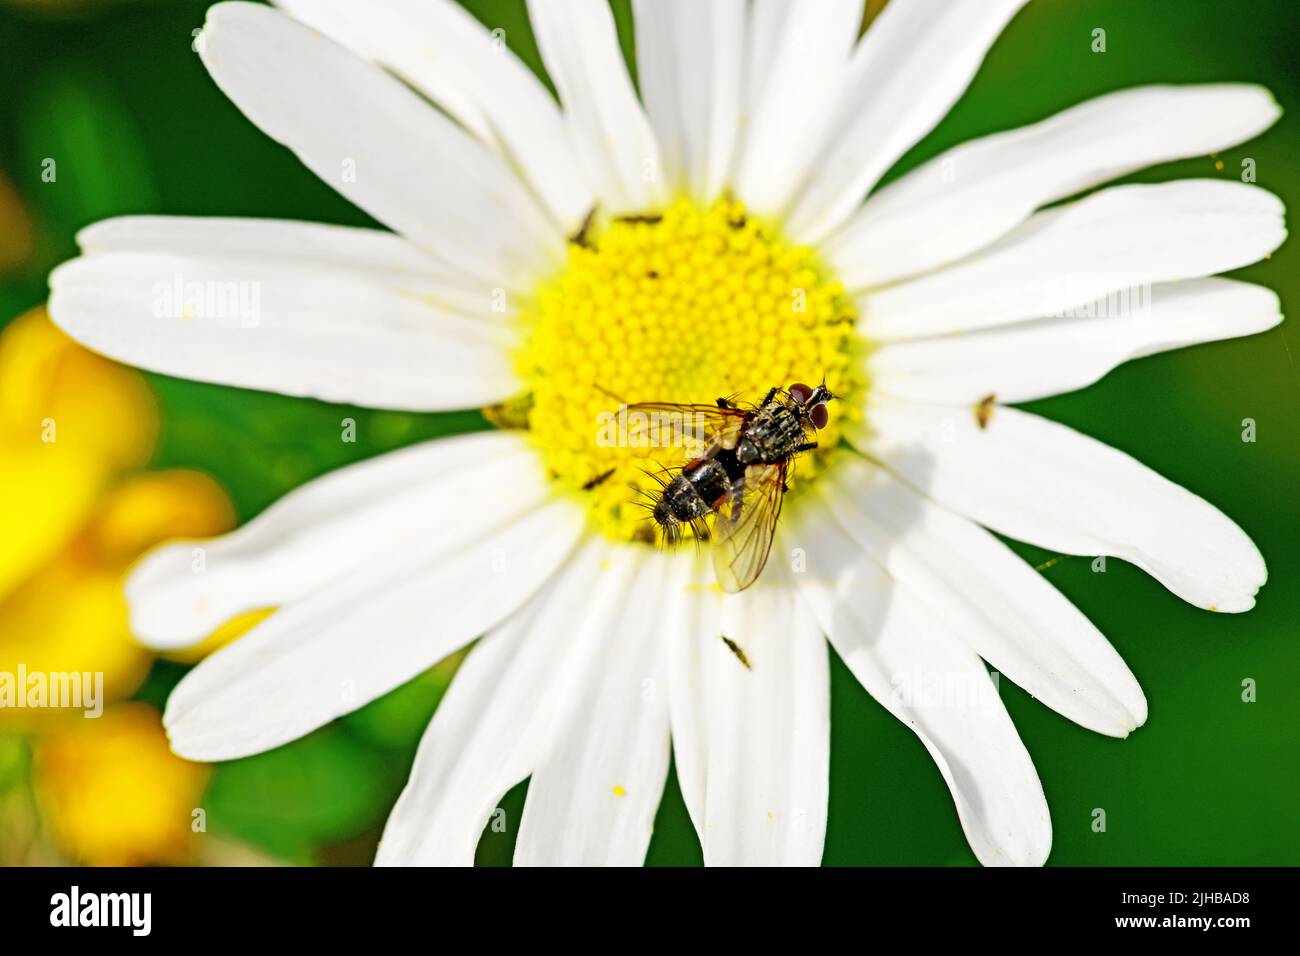 Large hairy fly of the order Diptera perched on a daisy flower against muted green background Stock Photo